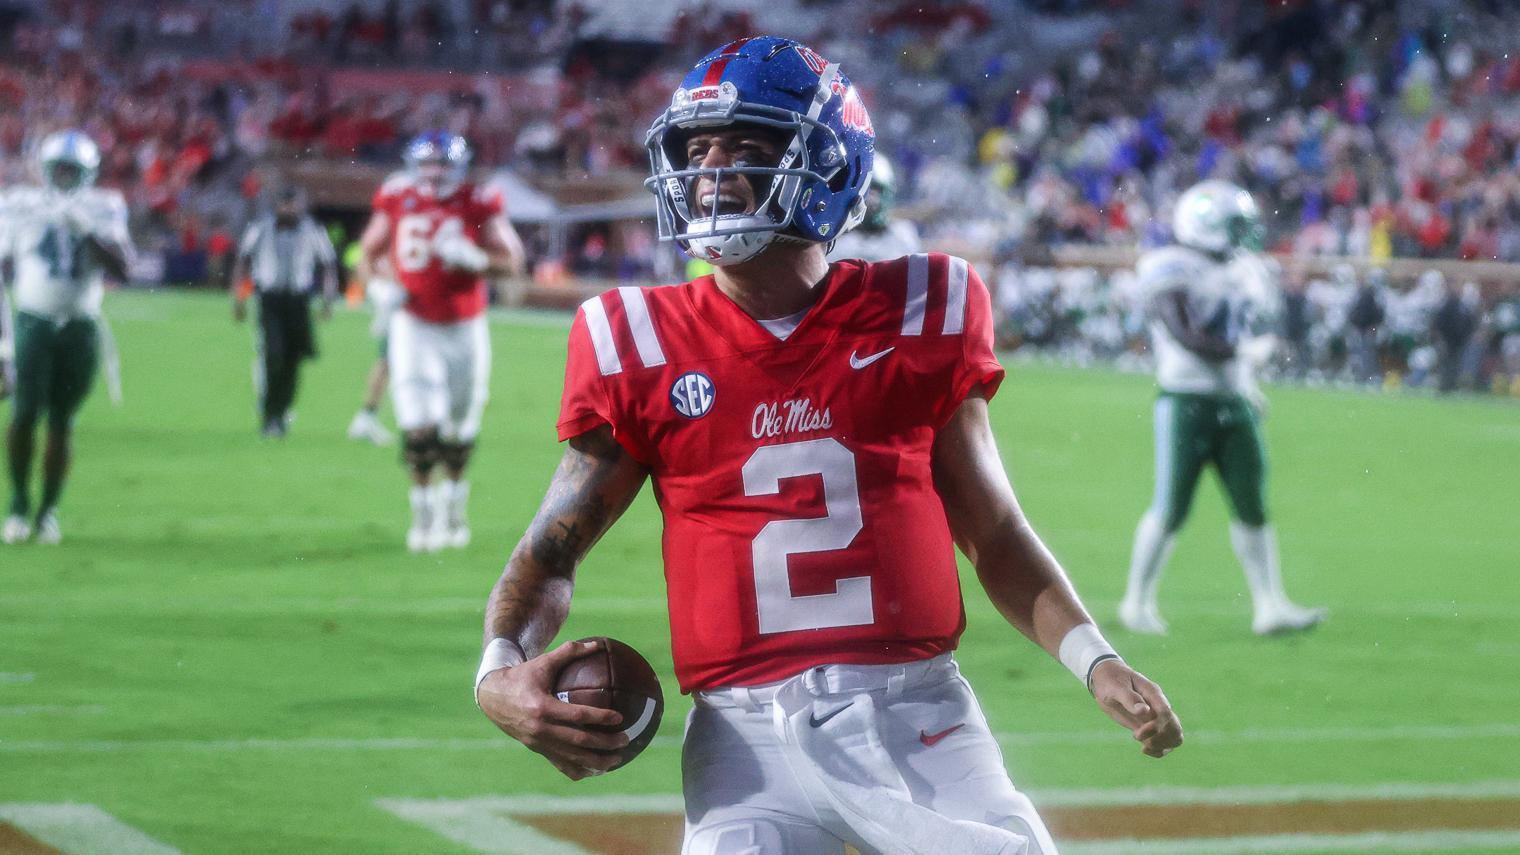 LSU Tigers vs Ole Miss Rebels Betting Prediction: Ole Miss Offense to Outpoint LSU in Oxford